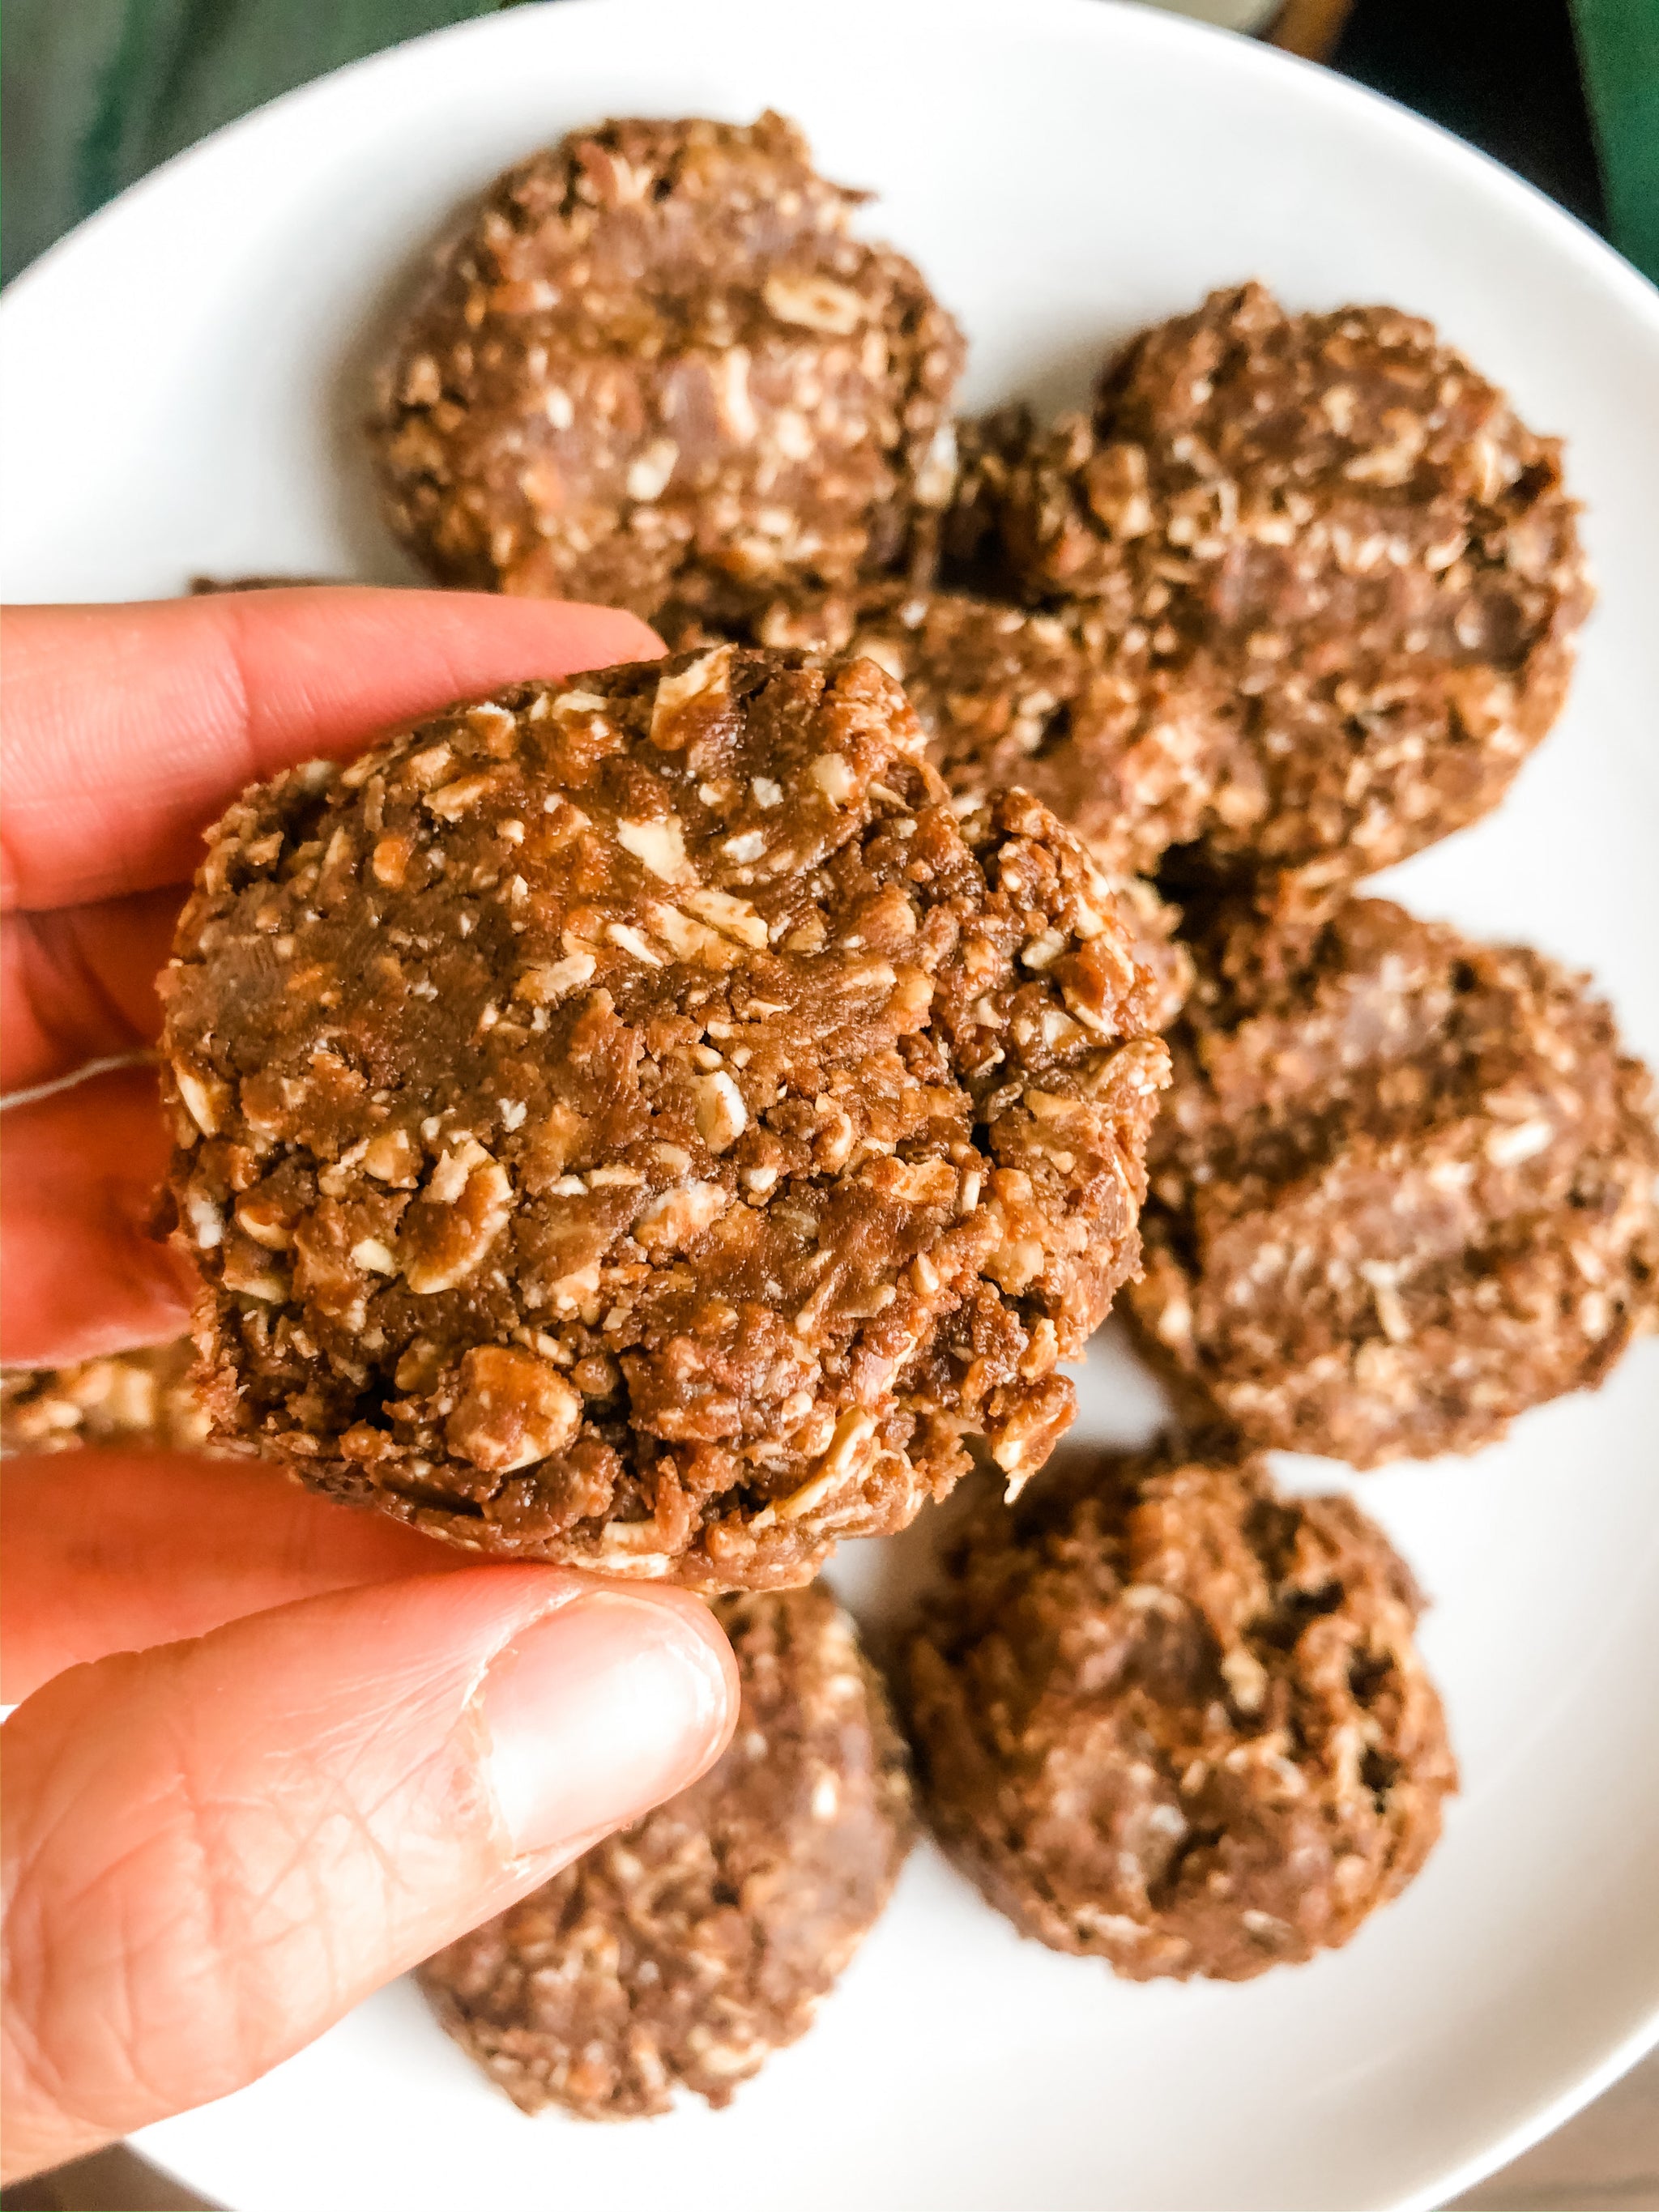 How to Make Chocolate Peanut Butter NO BAKE Lactation Cookies!